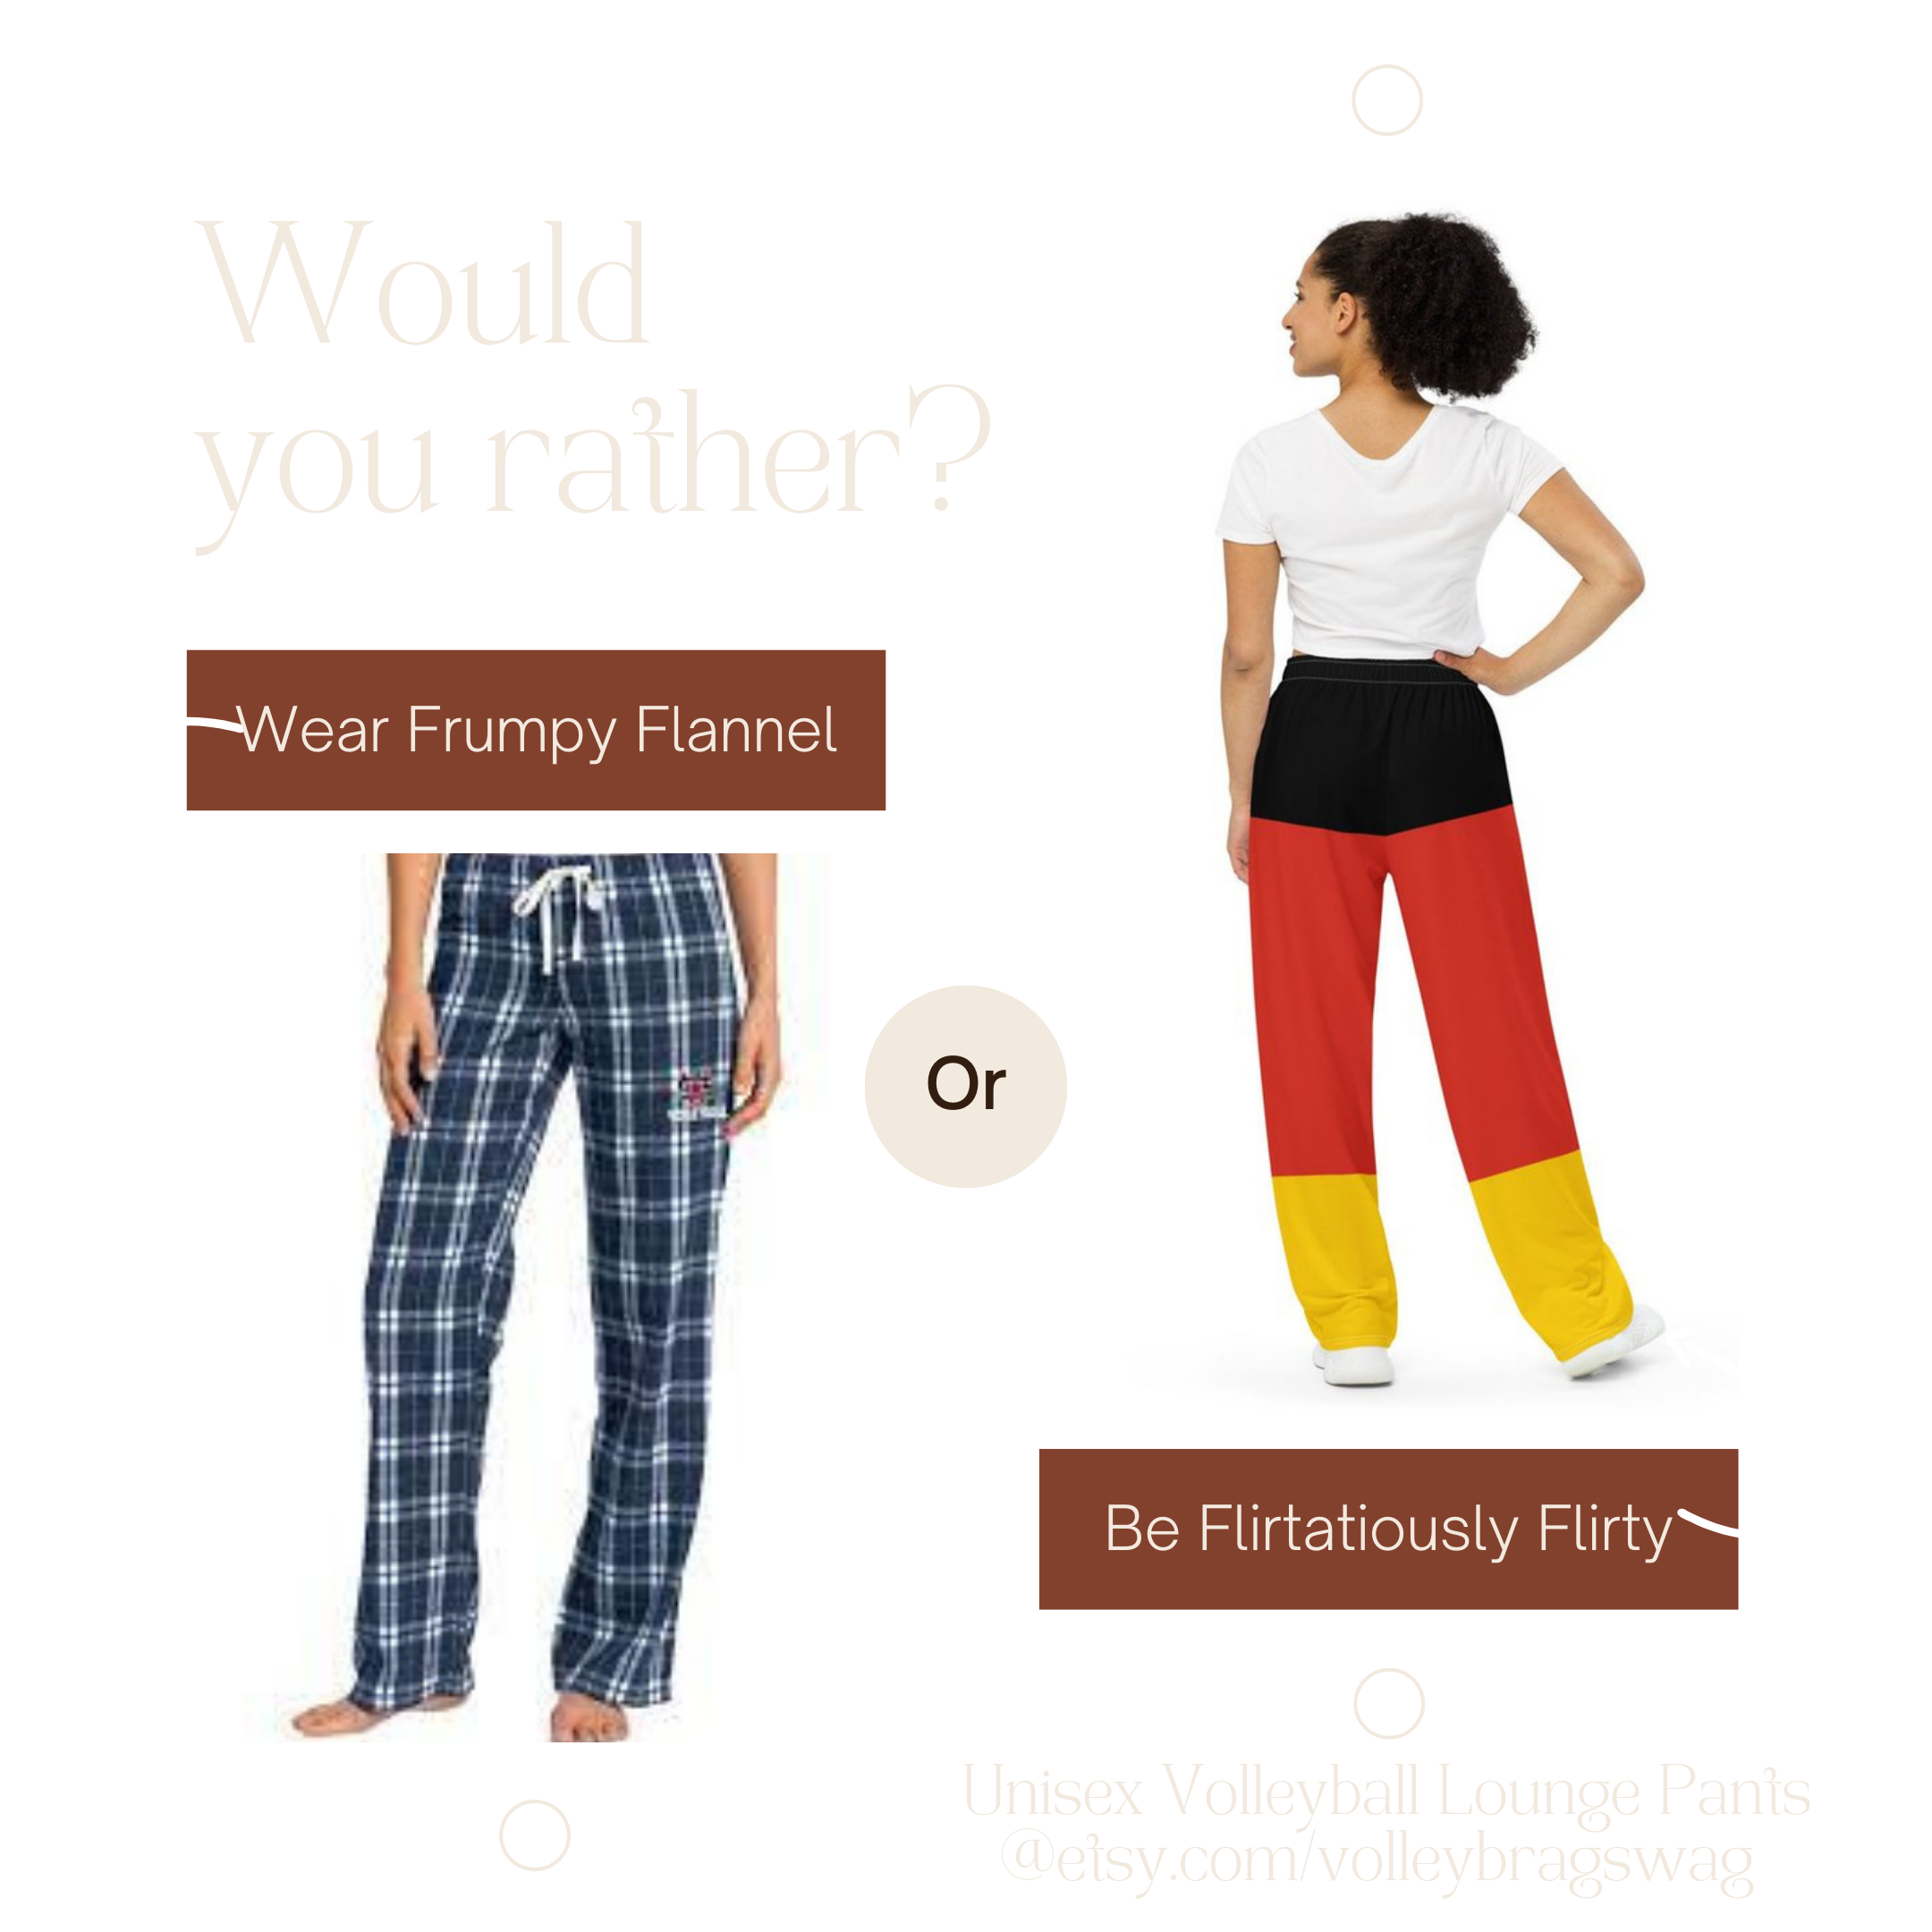 Good Bye To Flannel Volleyball Pants Hello To New Volleyball PJ Pants: These German flag inspired flirtatiously flirty red, black and yellow wide leg athletic pants are available now on Etsy.